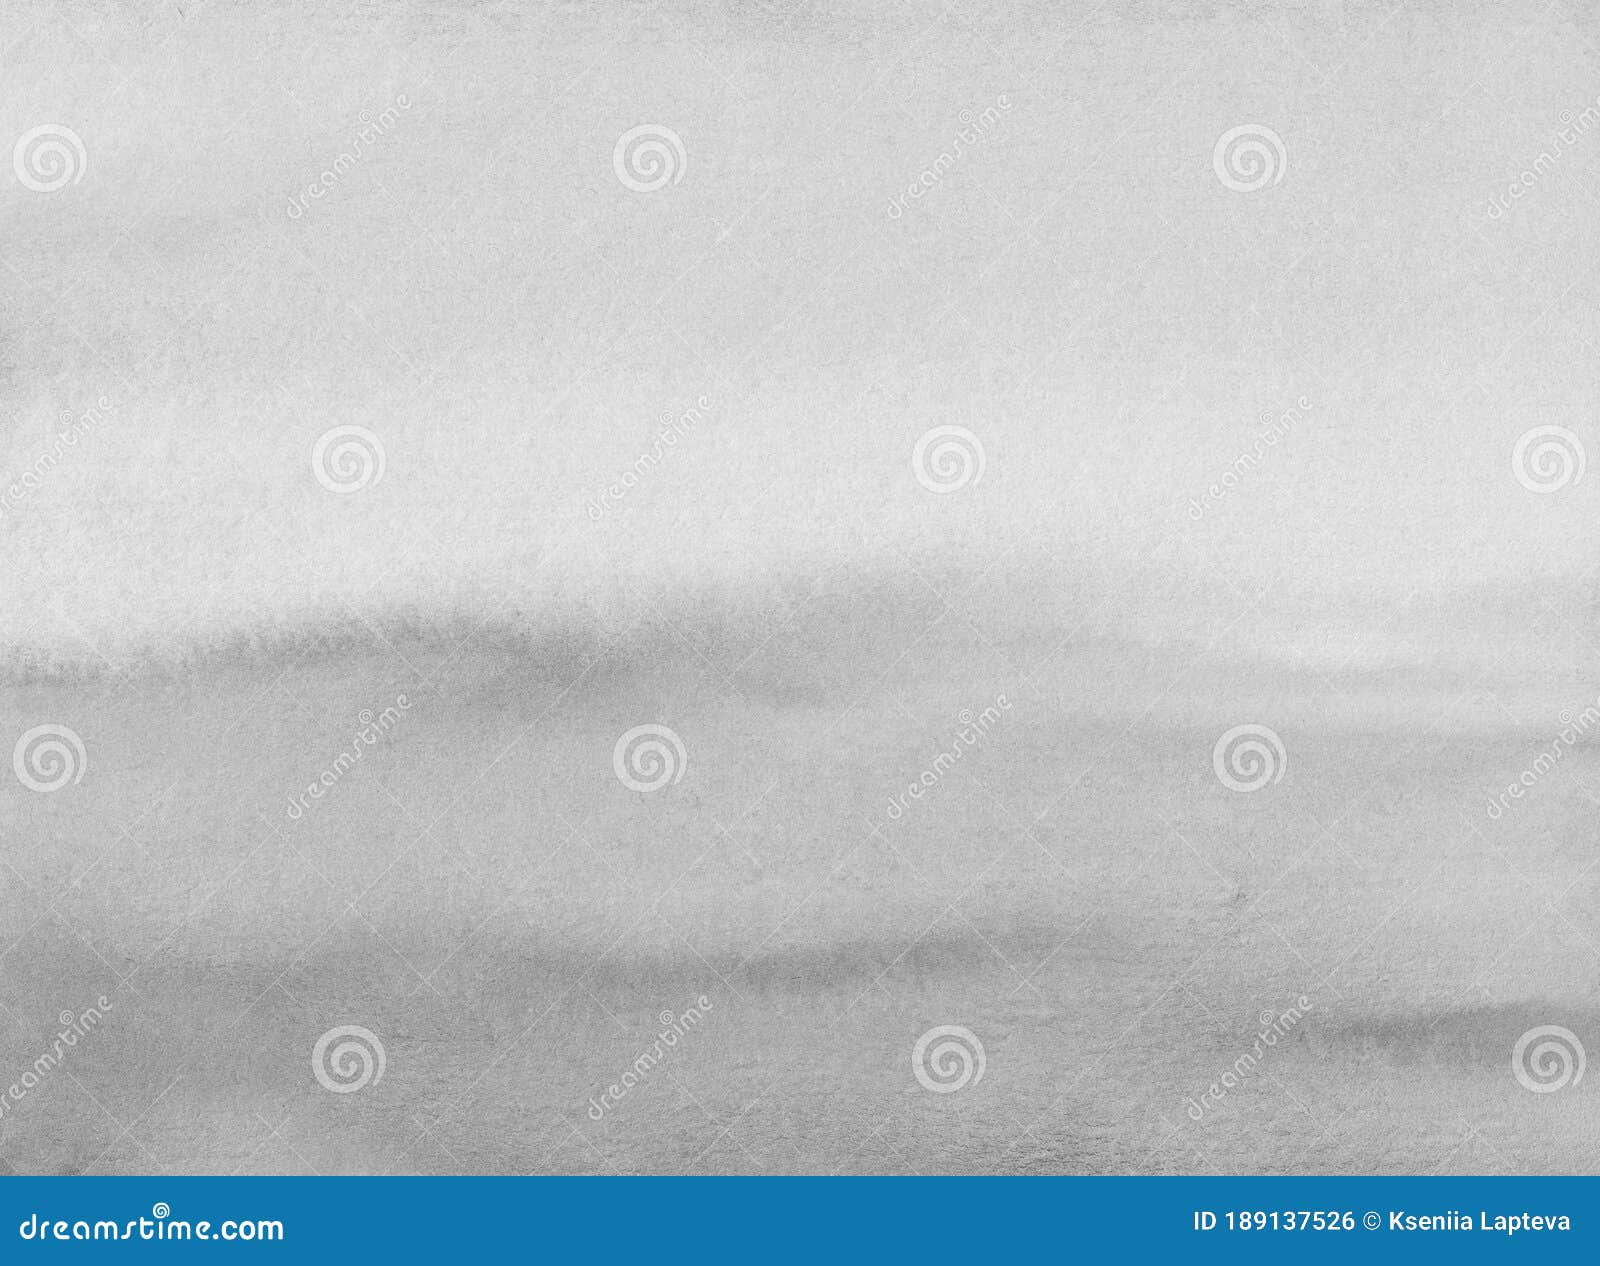 Watercolor Light Gray Gradient Background Texture. Black and White ...